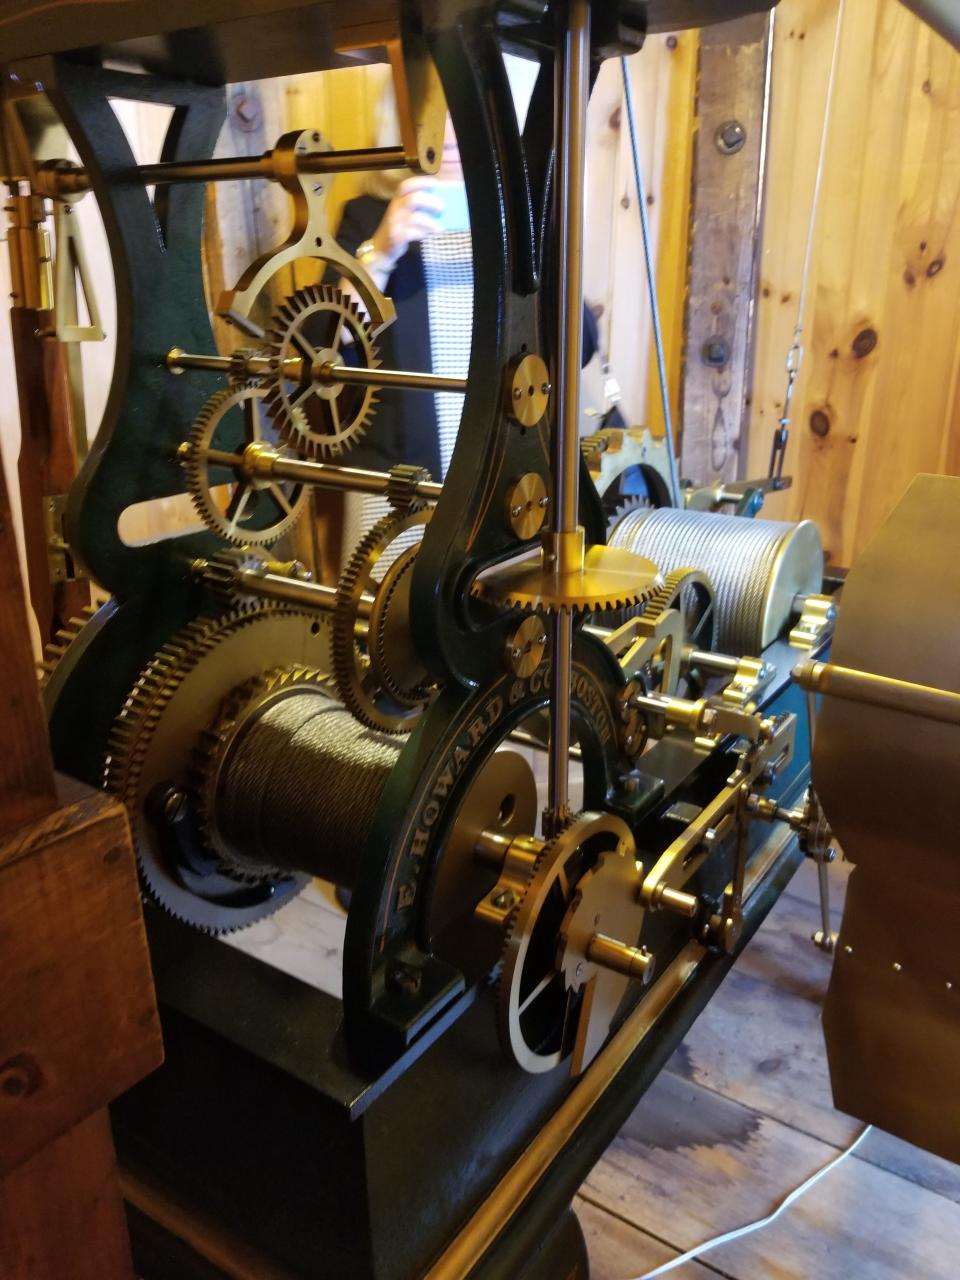 The E. Howard and Company clockworks in the North Church steeple are the focus of "A History of Portsmouth NH in 101 Objects" essay about an unusual collaboration to preserve an icon.